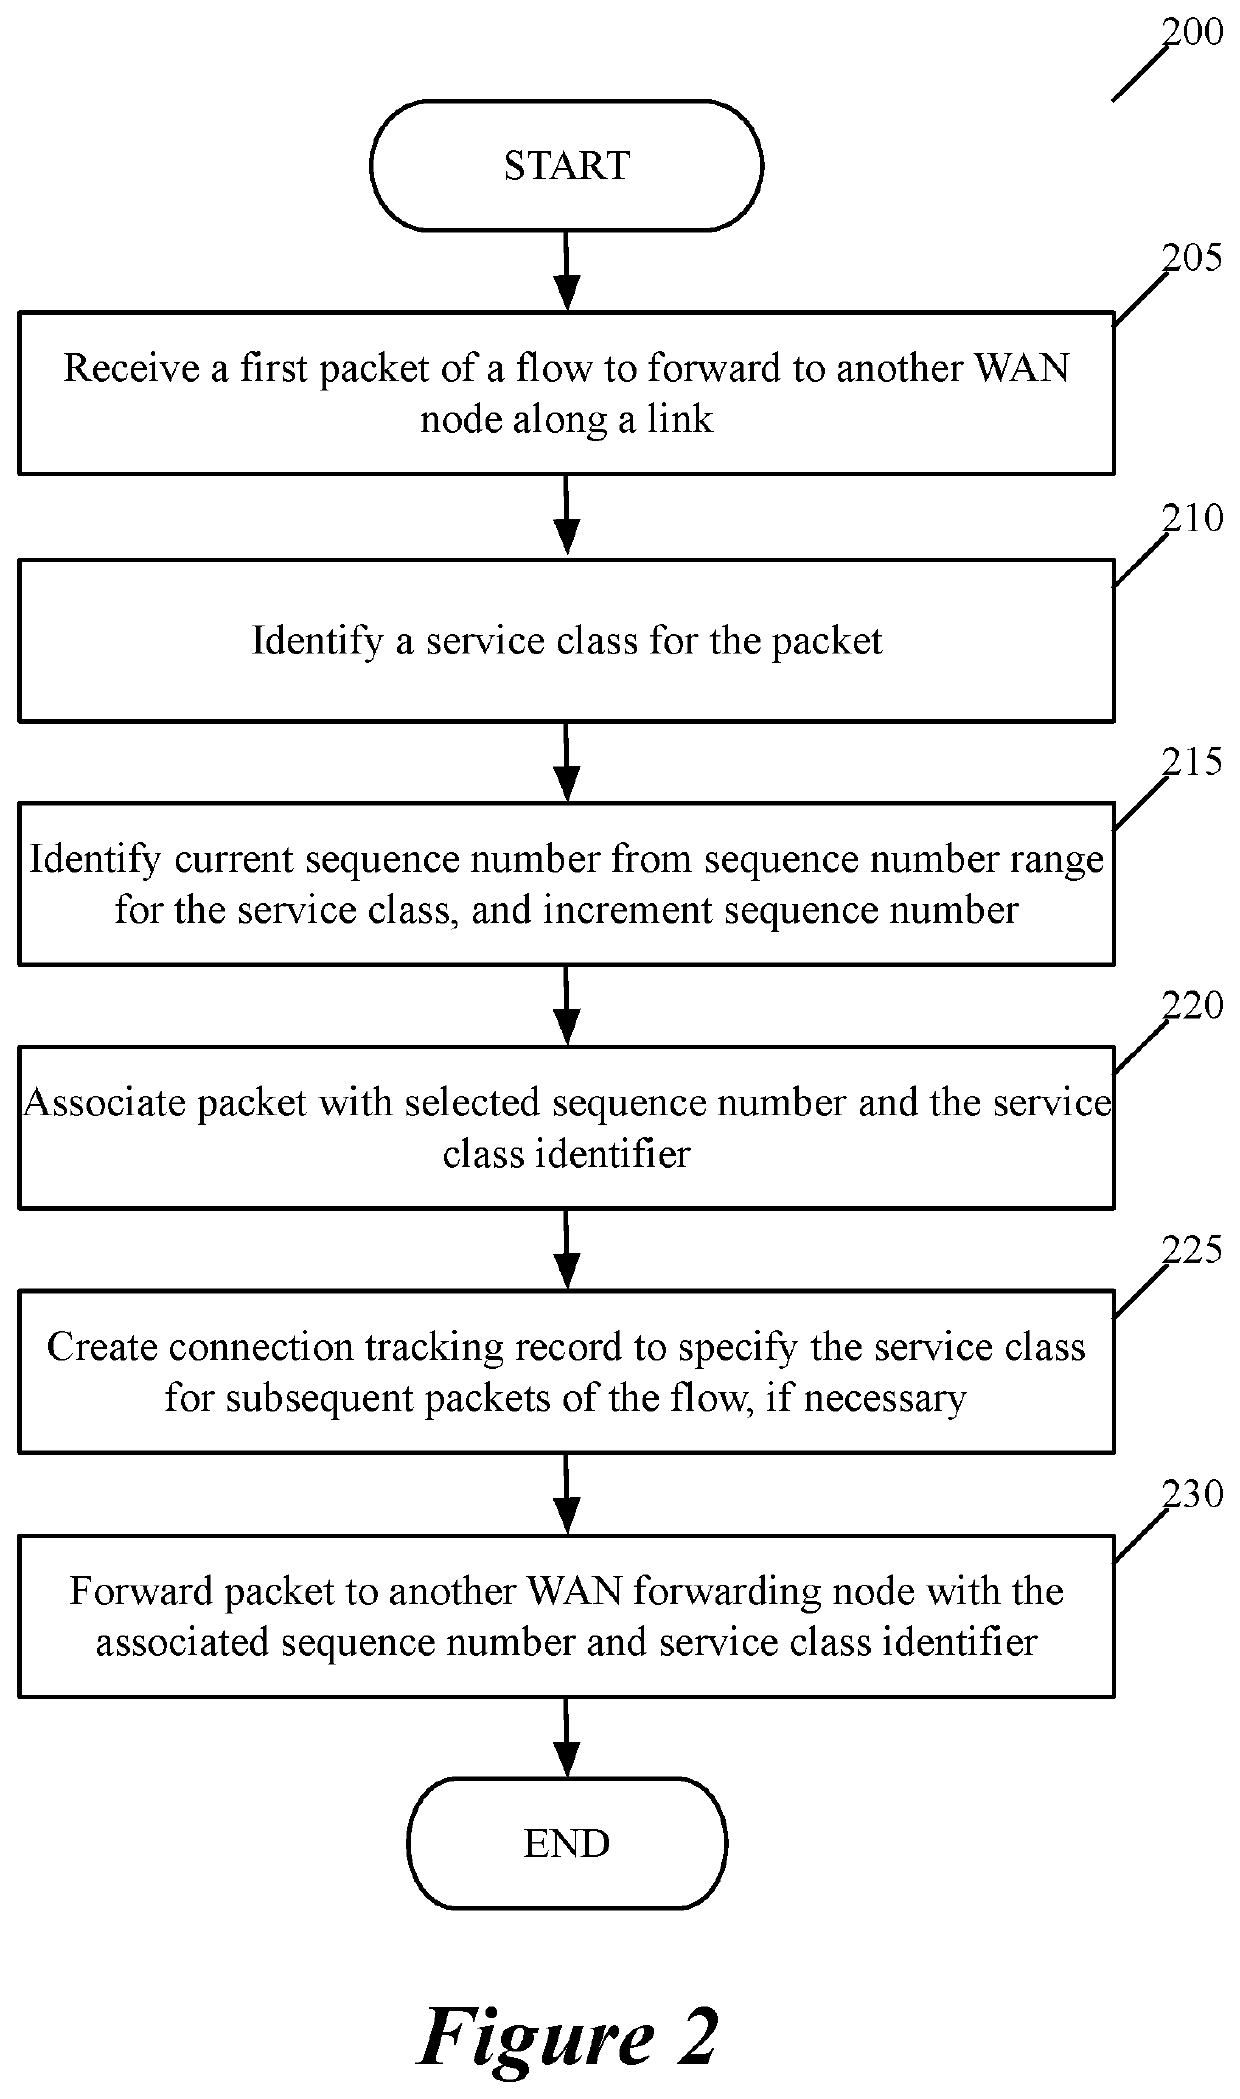 Using heart beats to monitor operational state of service classes of a QoS aware network link